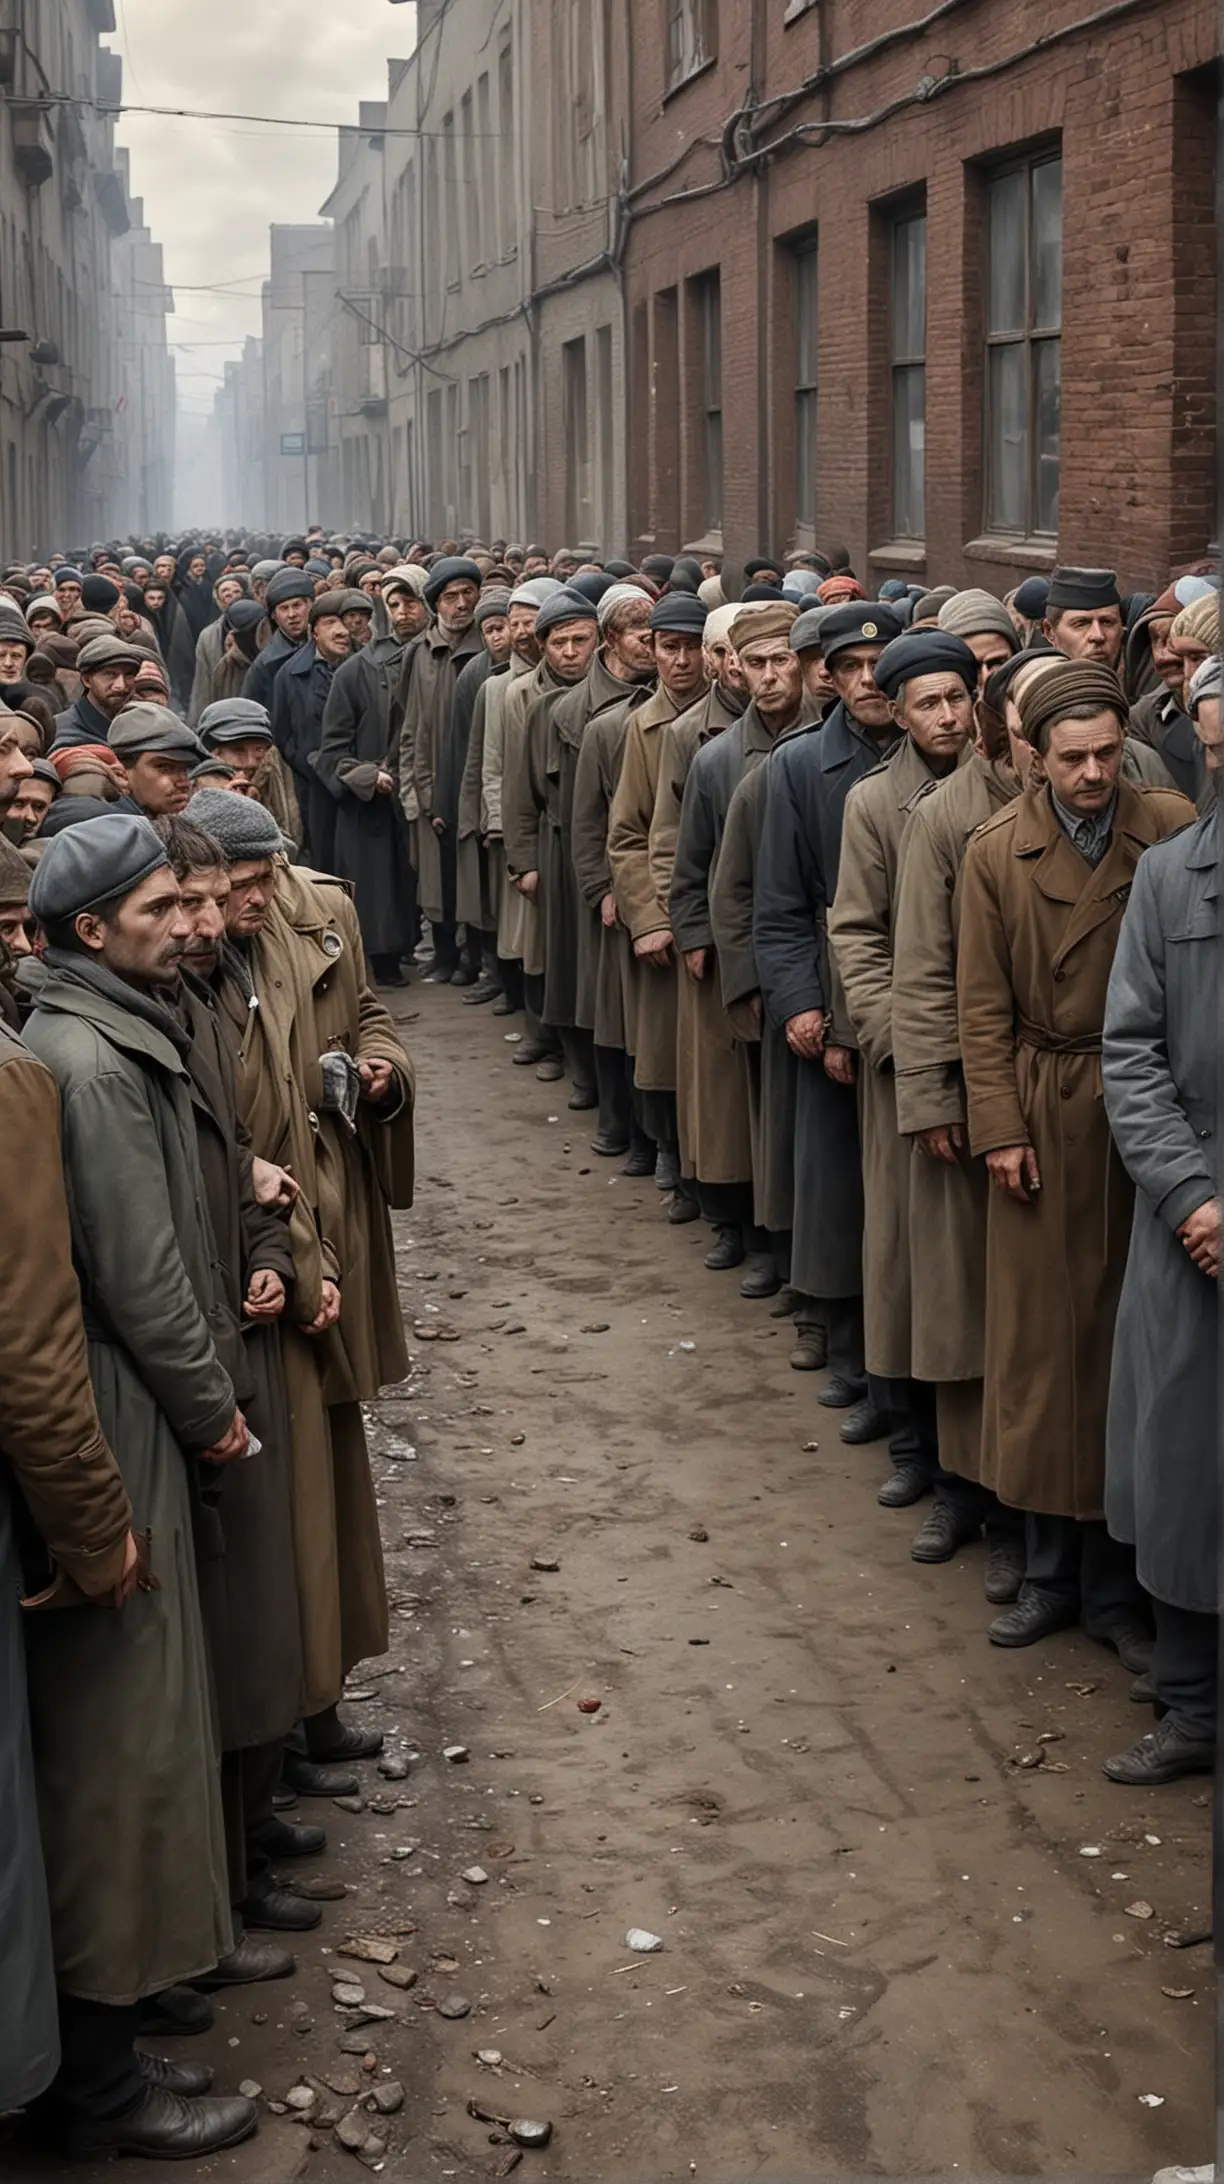 Queue for Rations: The queue could be depicted as long and winding, with weary-looking people waiting patiently for meager food rations. This image should highlight the economic hardships faced by ordinary soviet citizens, particularly those targeted as enemies of the people. Hyper realistic.